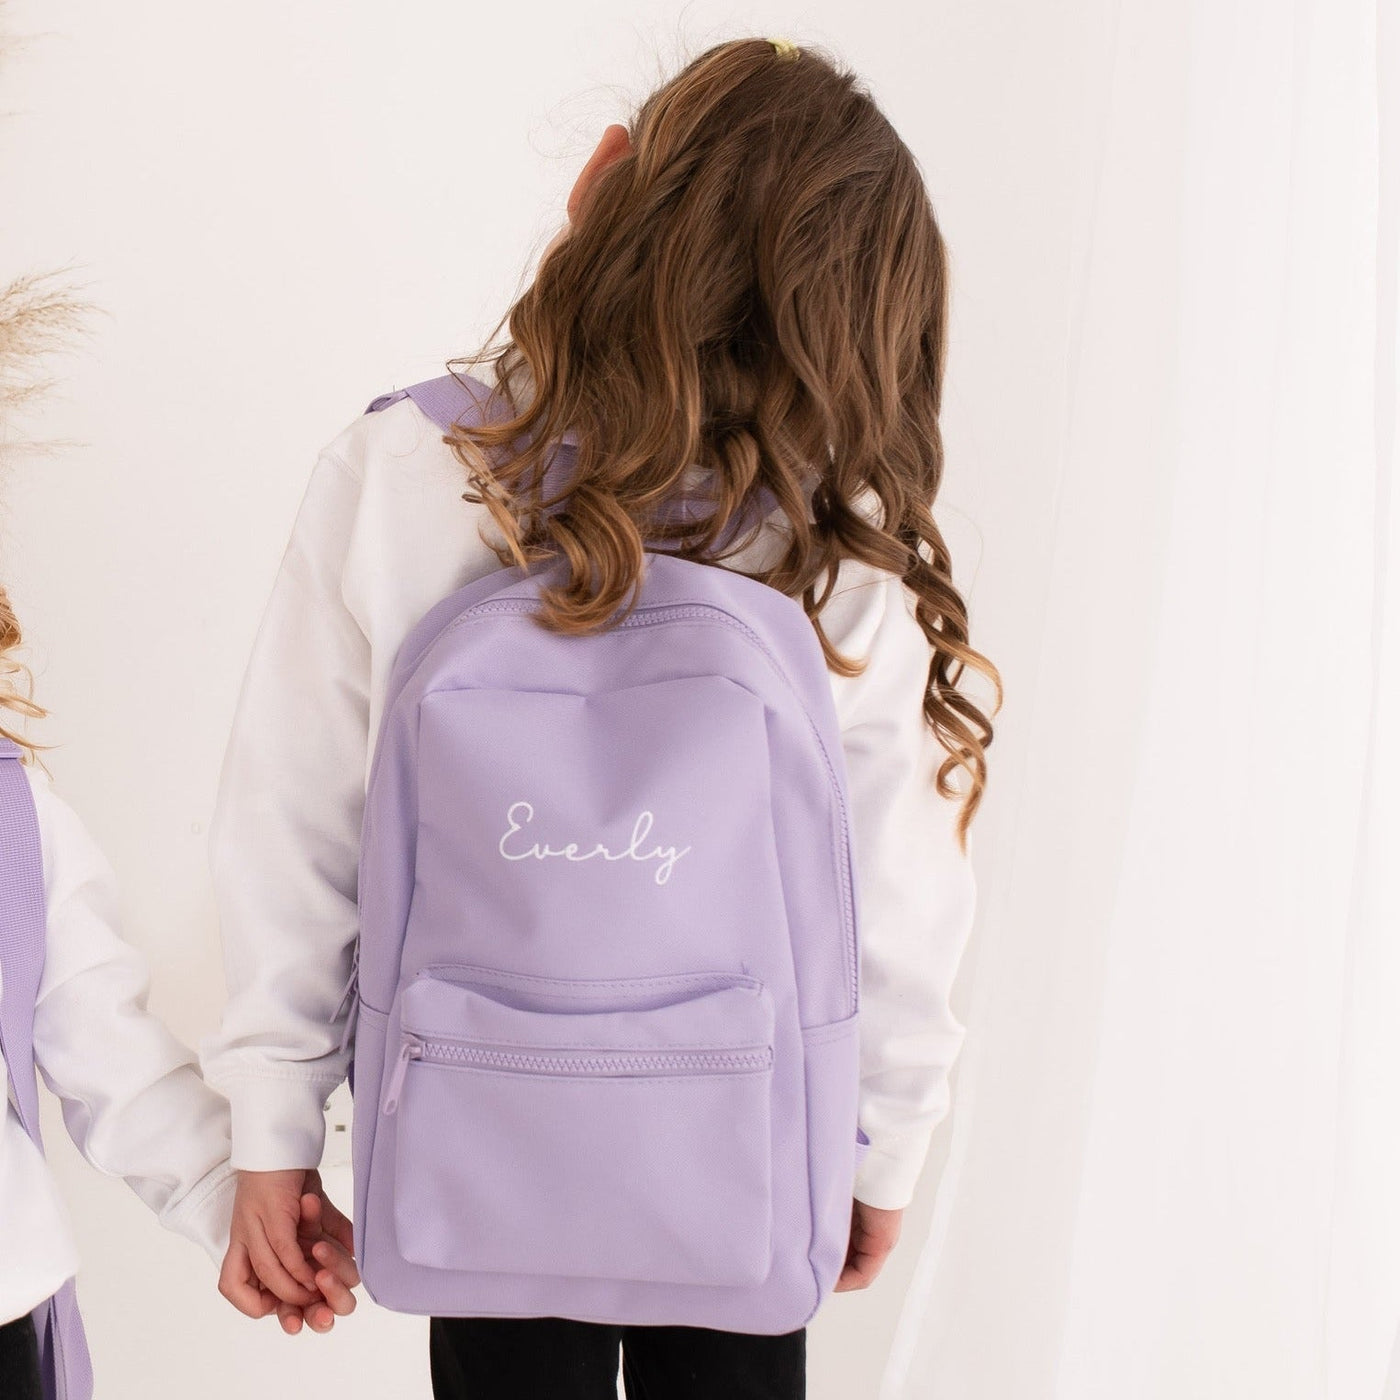 Embroidered Script Personalised Backpack - Amber and Noah